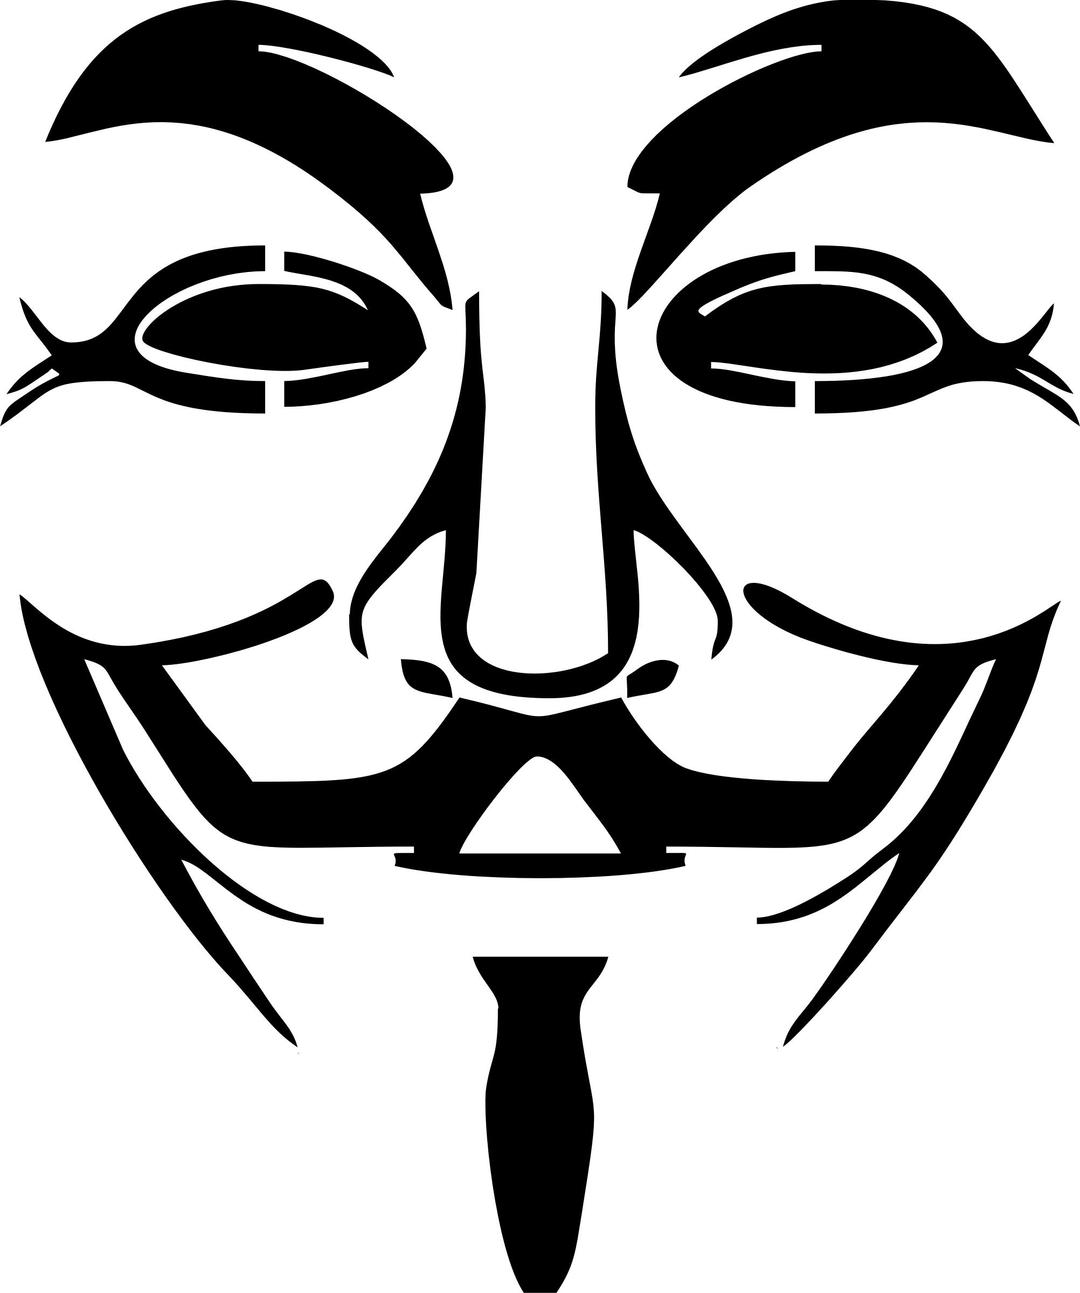 anonimous mask png transparent